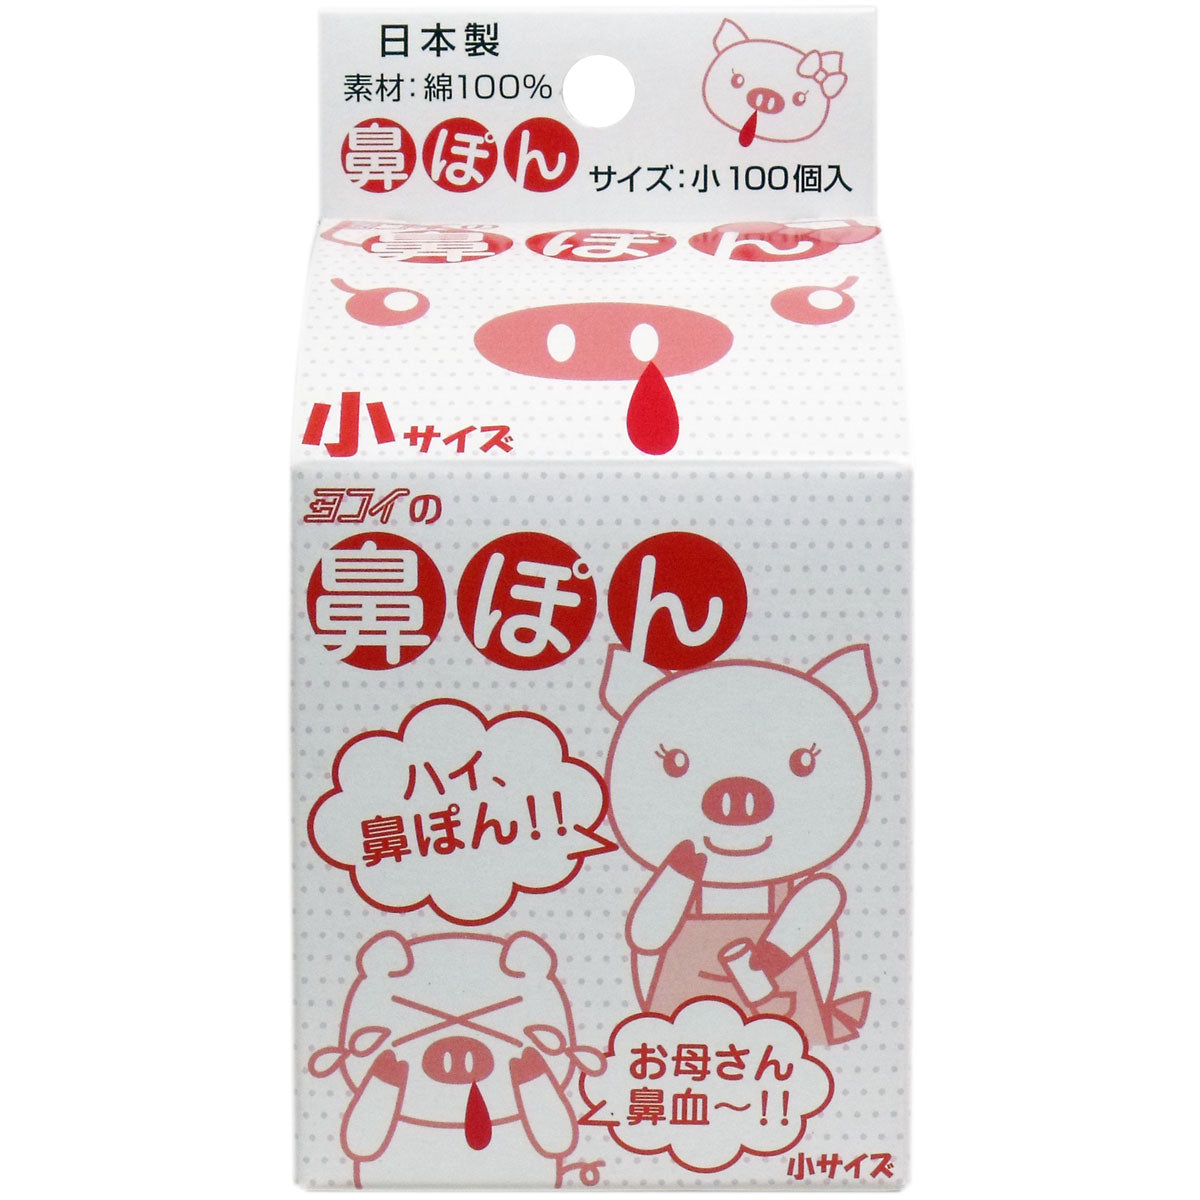 Made in Japan, hemostatic cotton, nosebleed tampons, cotton balls, household essentials, good helper for nosebleeds, nosebleed cotton balls, runny nose, nosebleed stopper